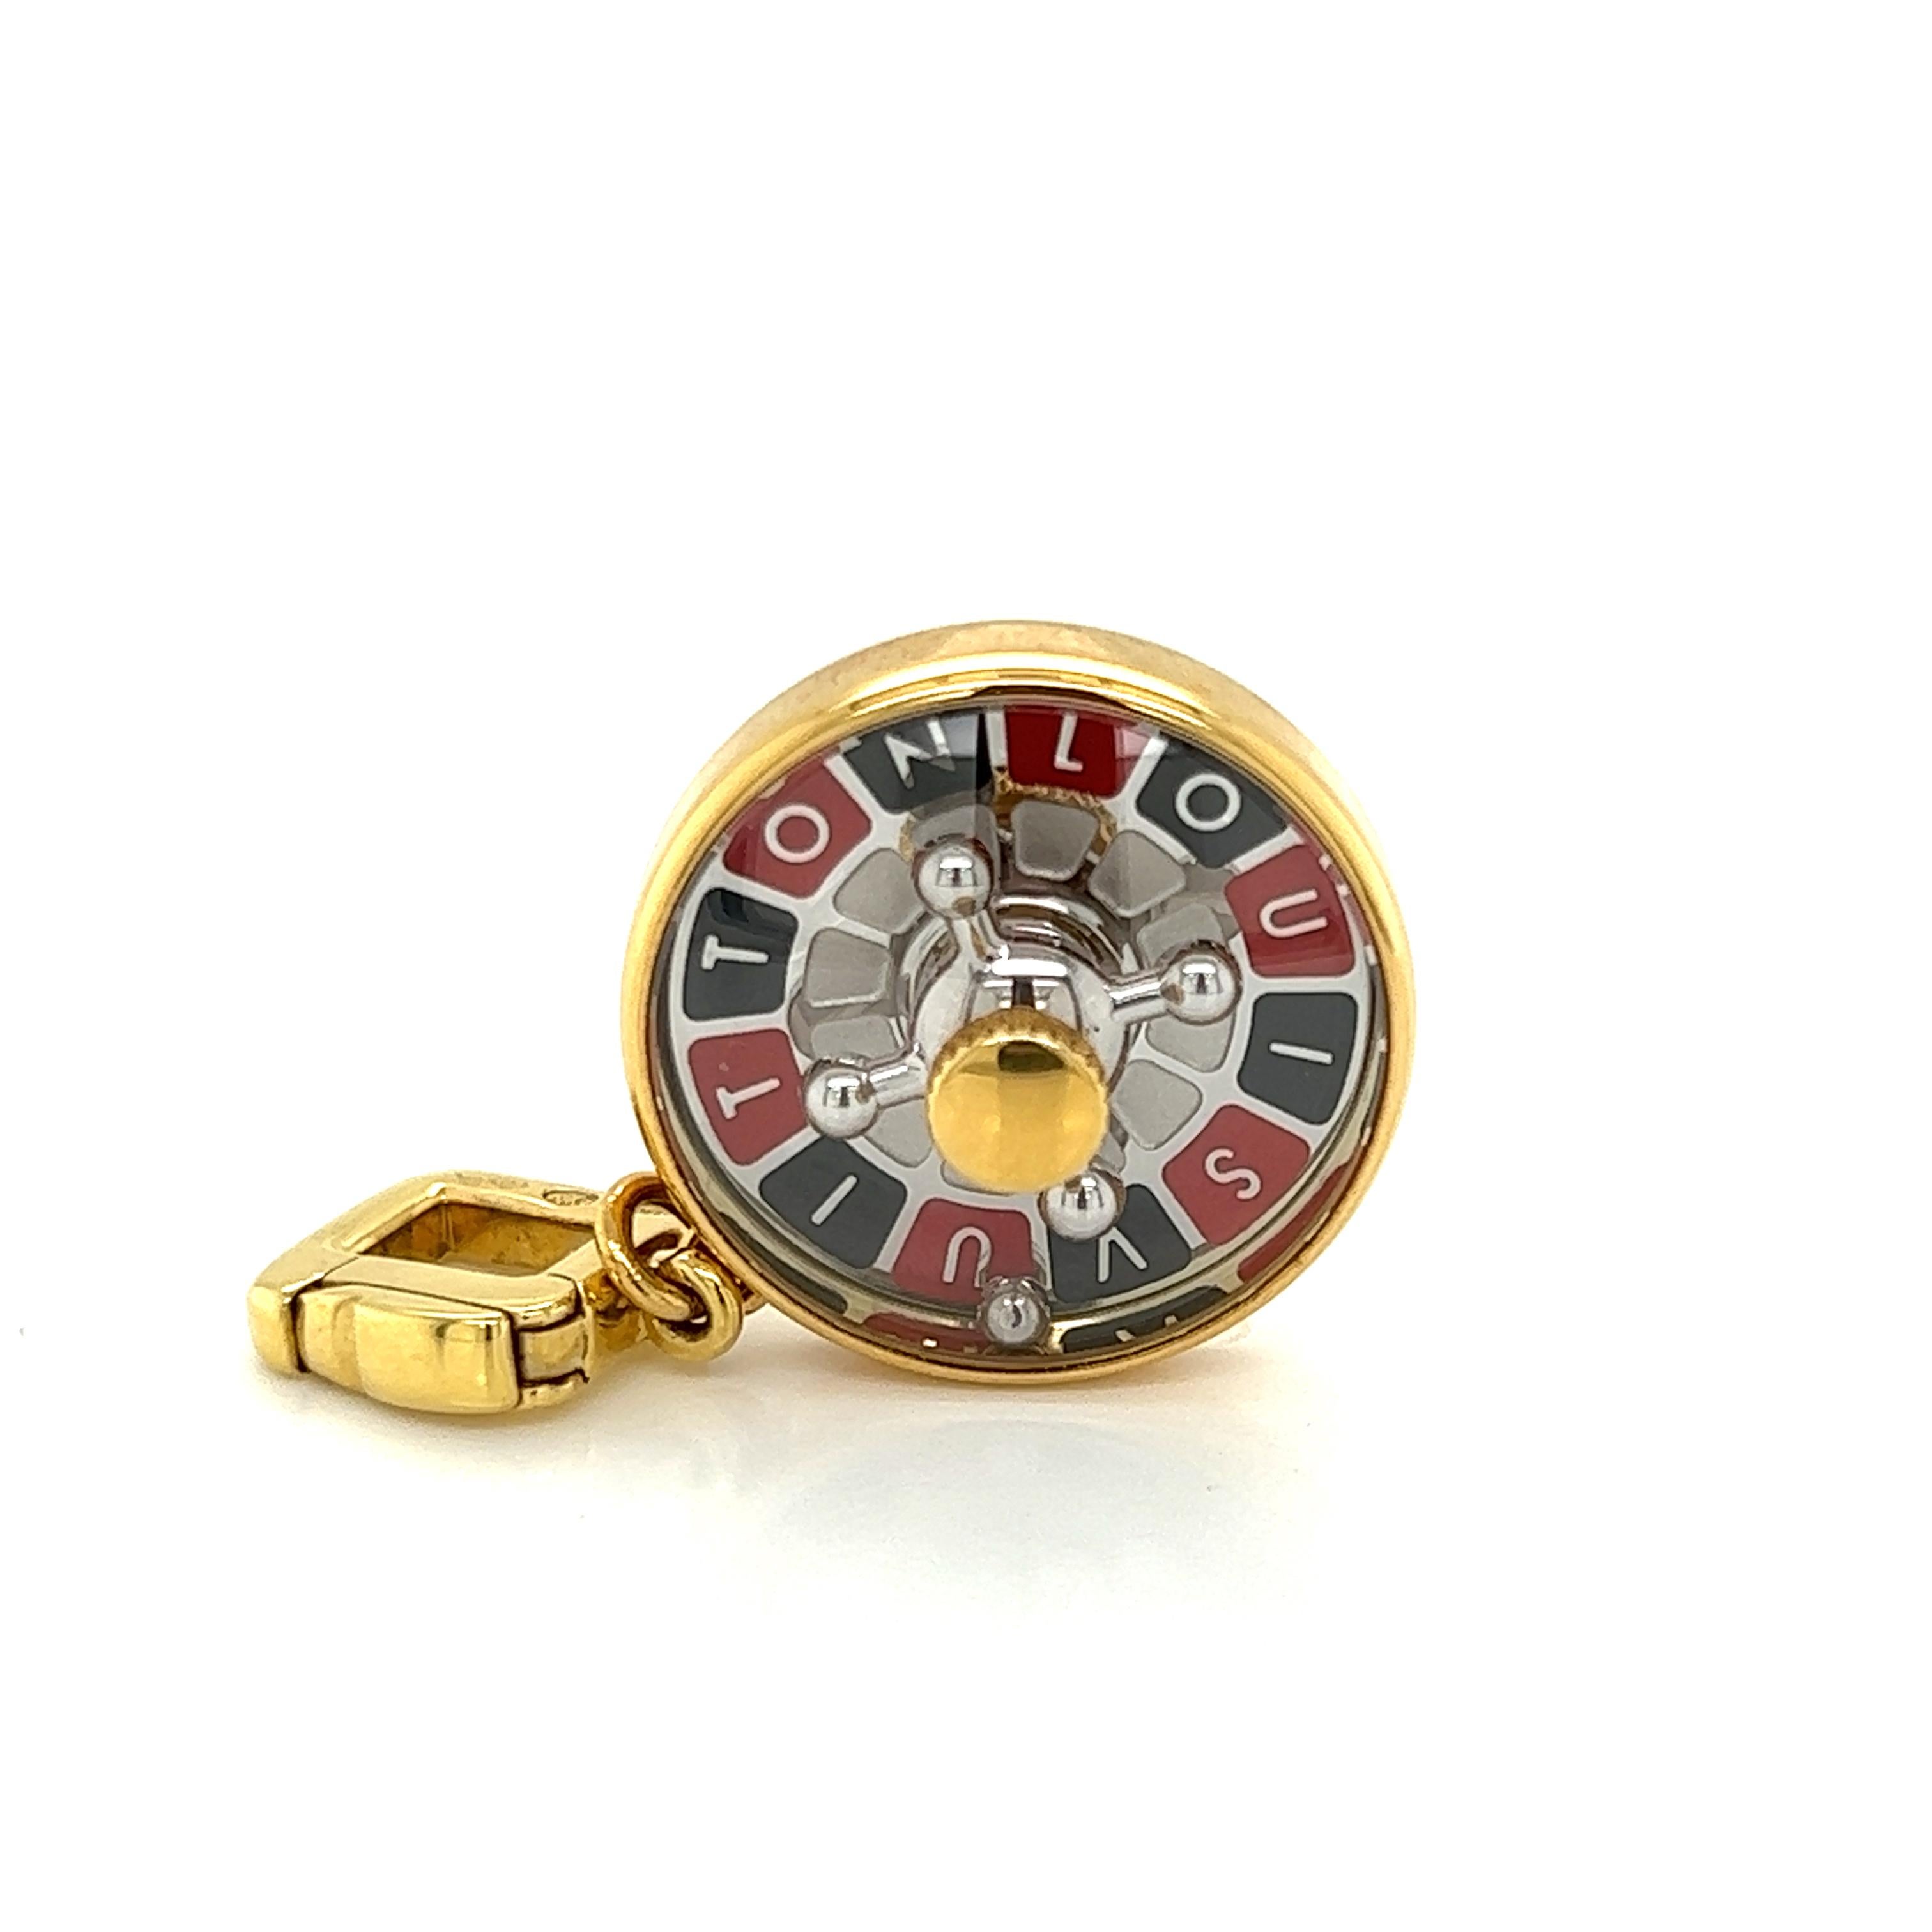 This is a charming authentic pendant or charm from Louis Vuitton. It is crafted from 18k yellow gold featuring a high dome sapphire crystal cover over a roulette game wheel set in a round gold frame with solid gold back engraved in script GOOD LUCK.